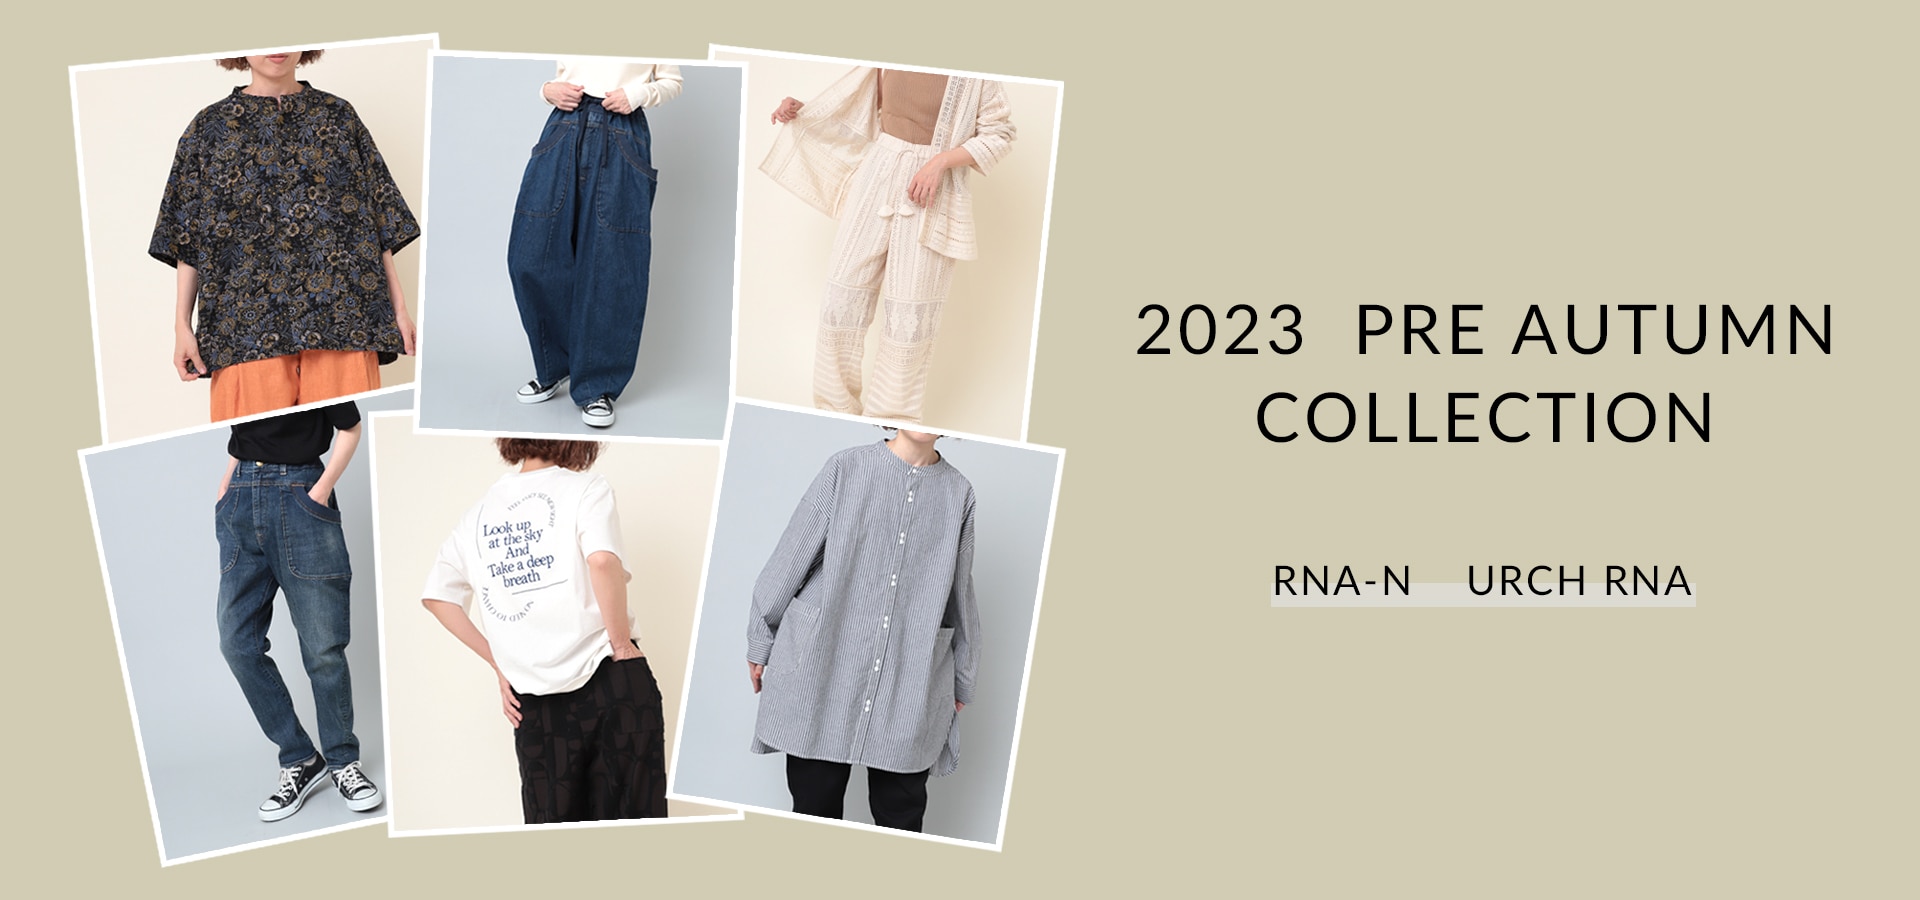 2023.6 N・URCH NEW ARRIVALS